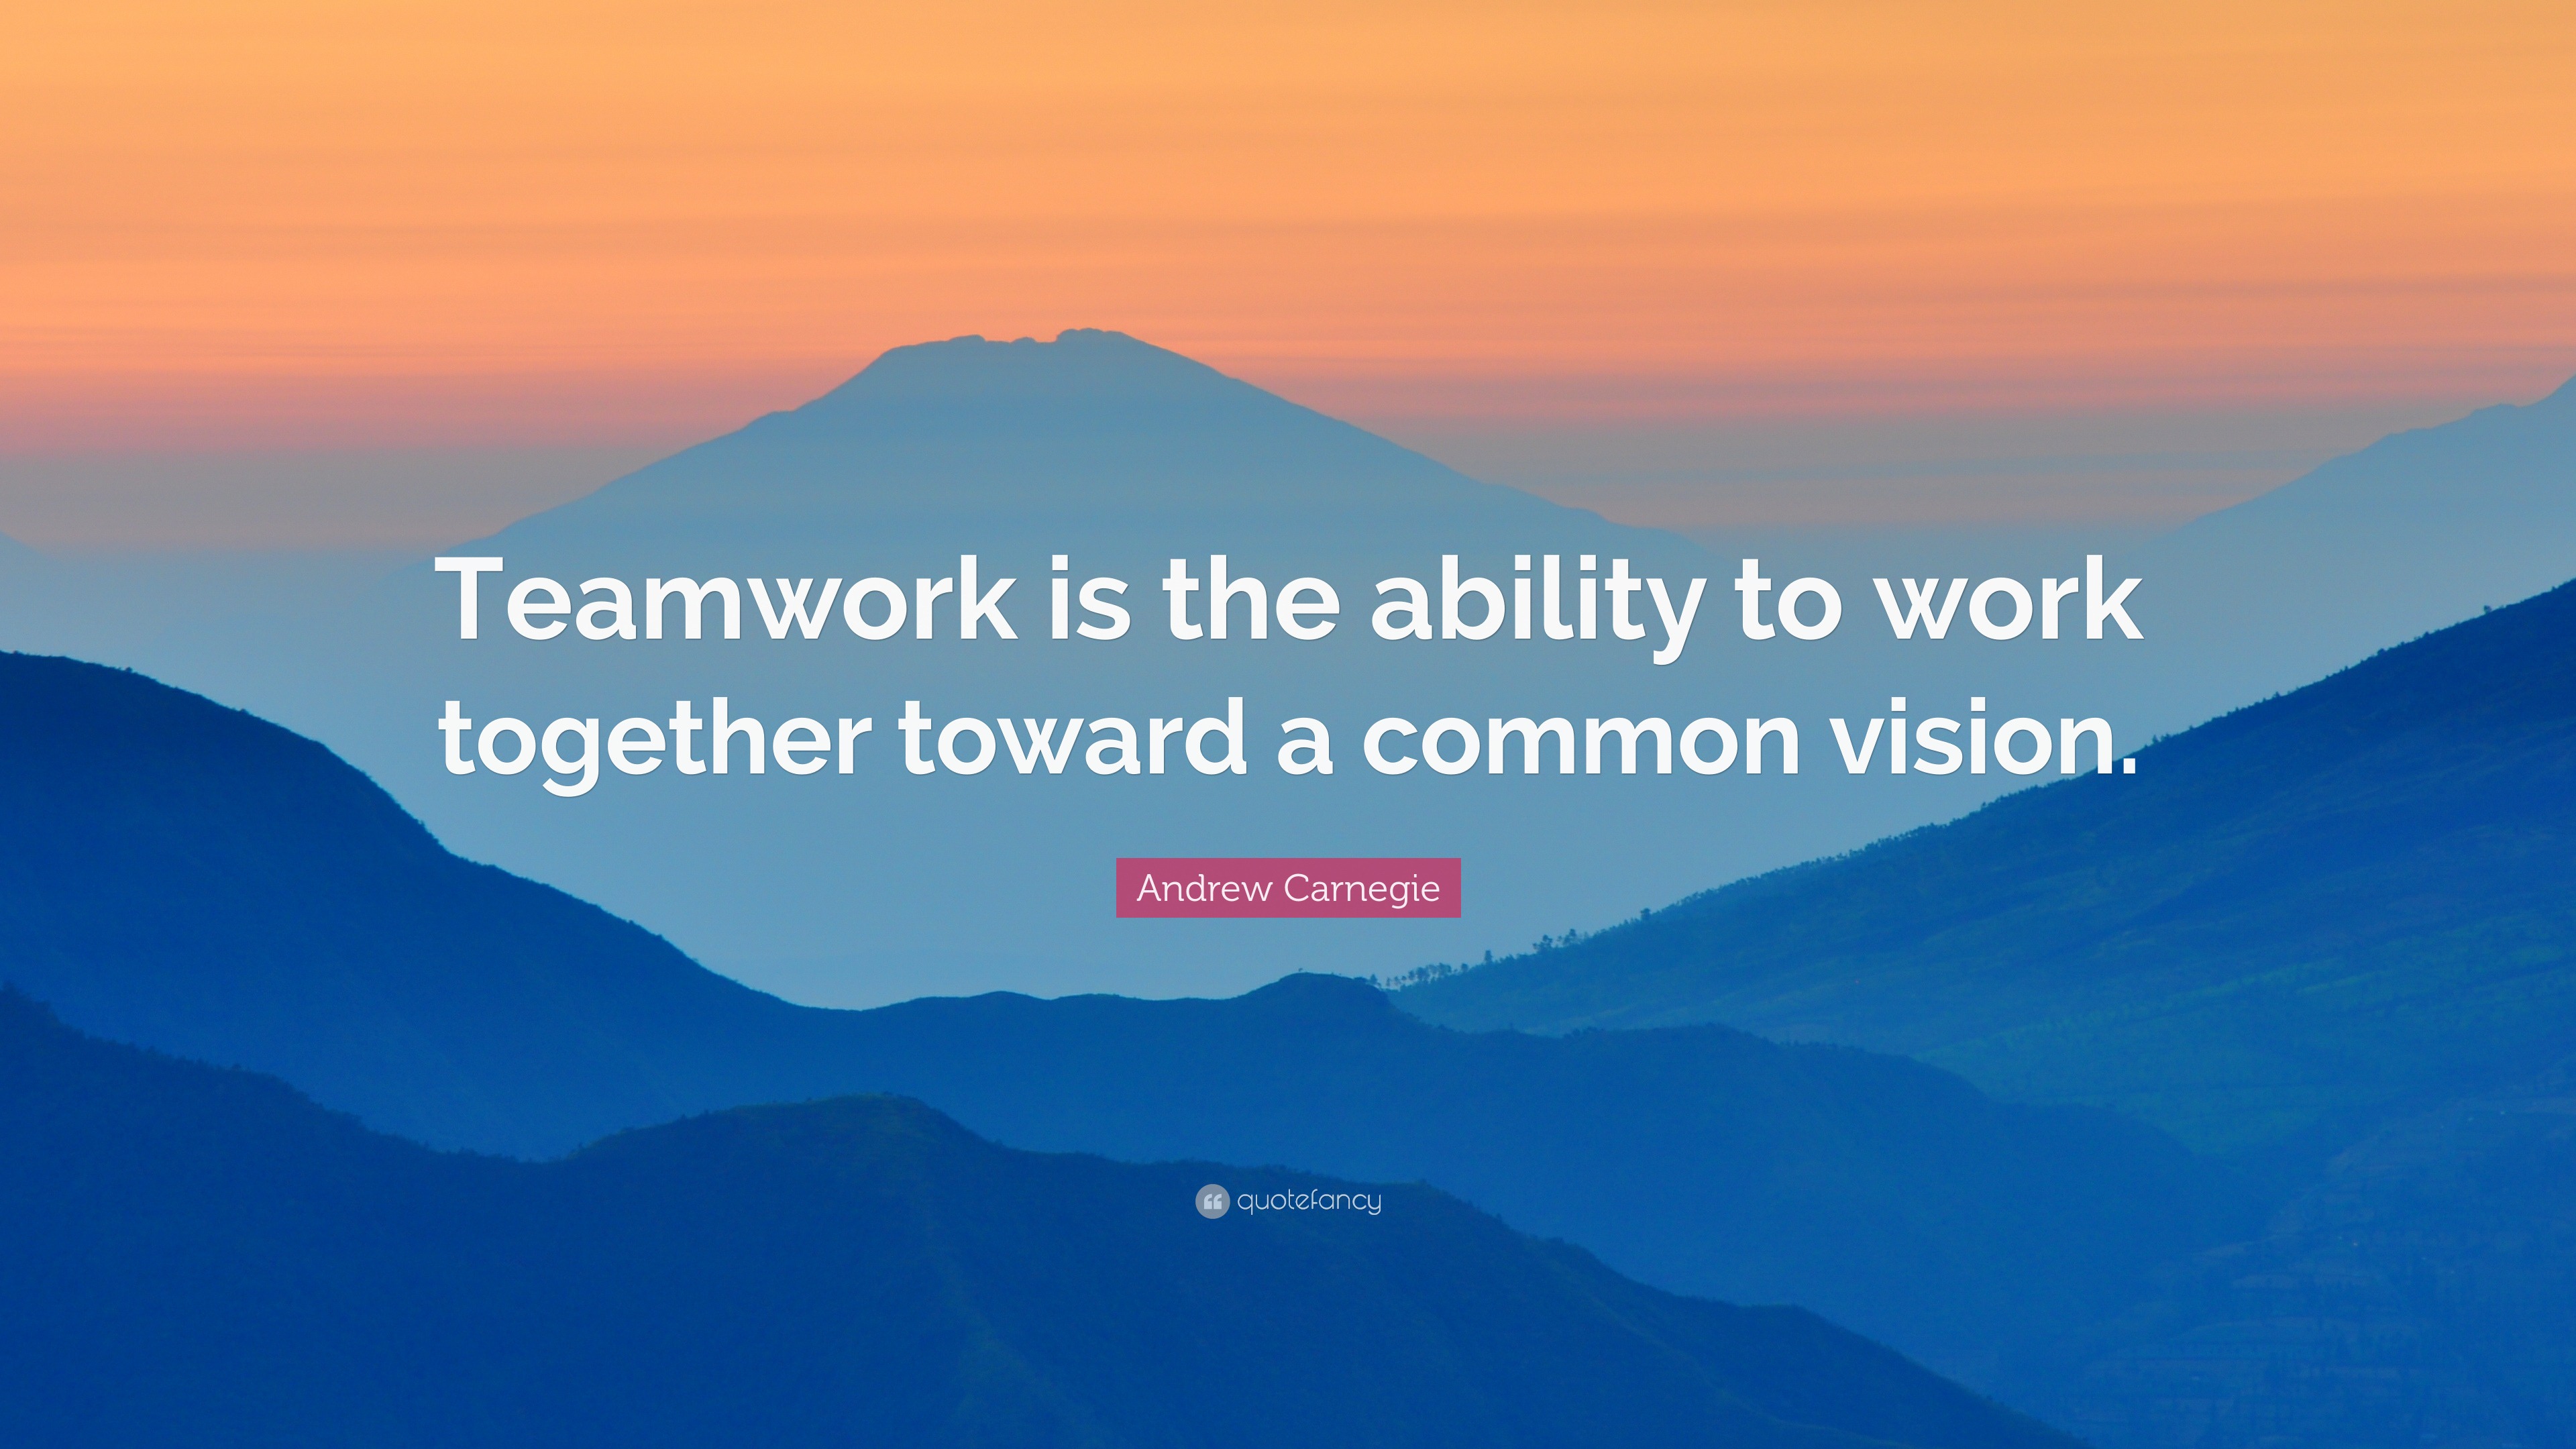 Andrew Carnegie Quote “teamwork Is The Ability To Work Together Toward A Common Vision”